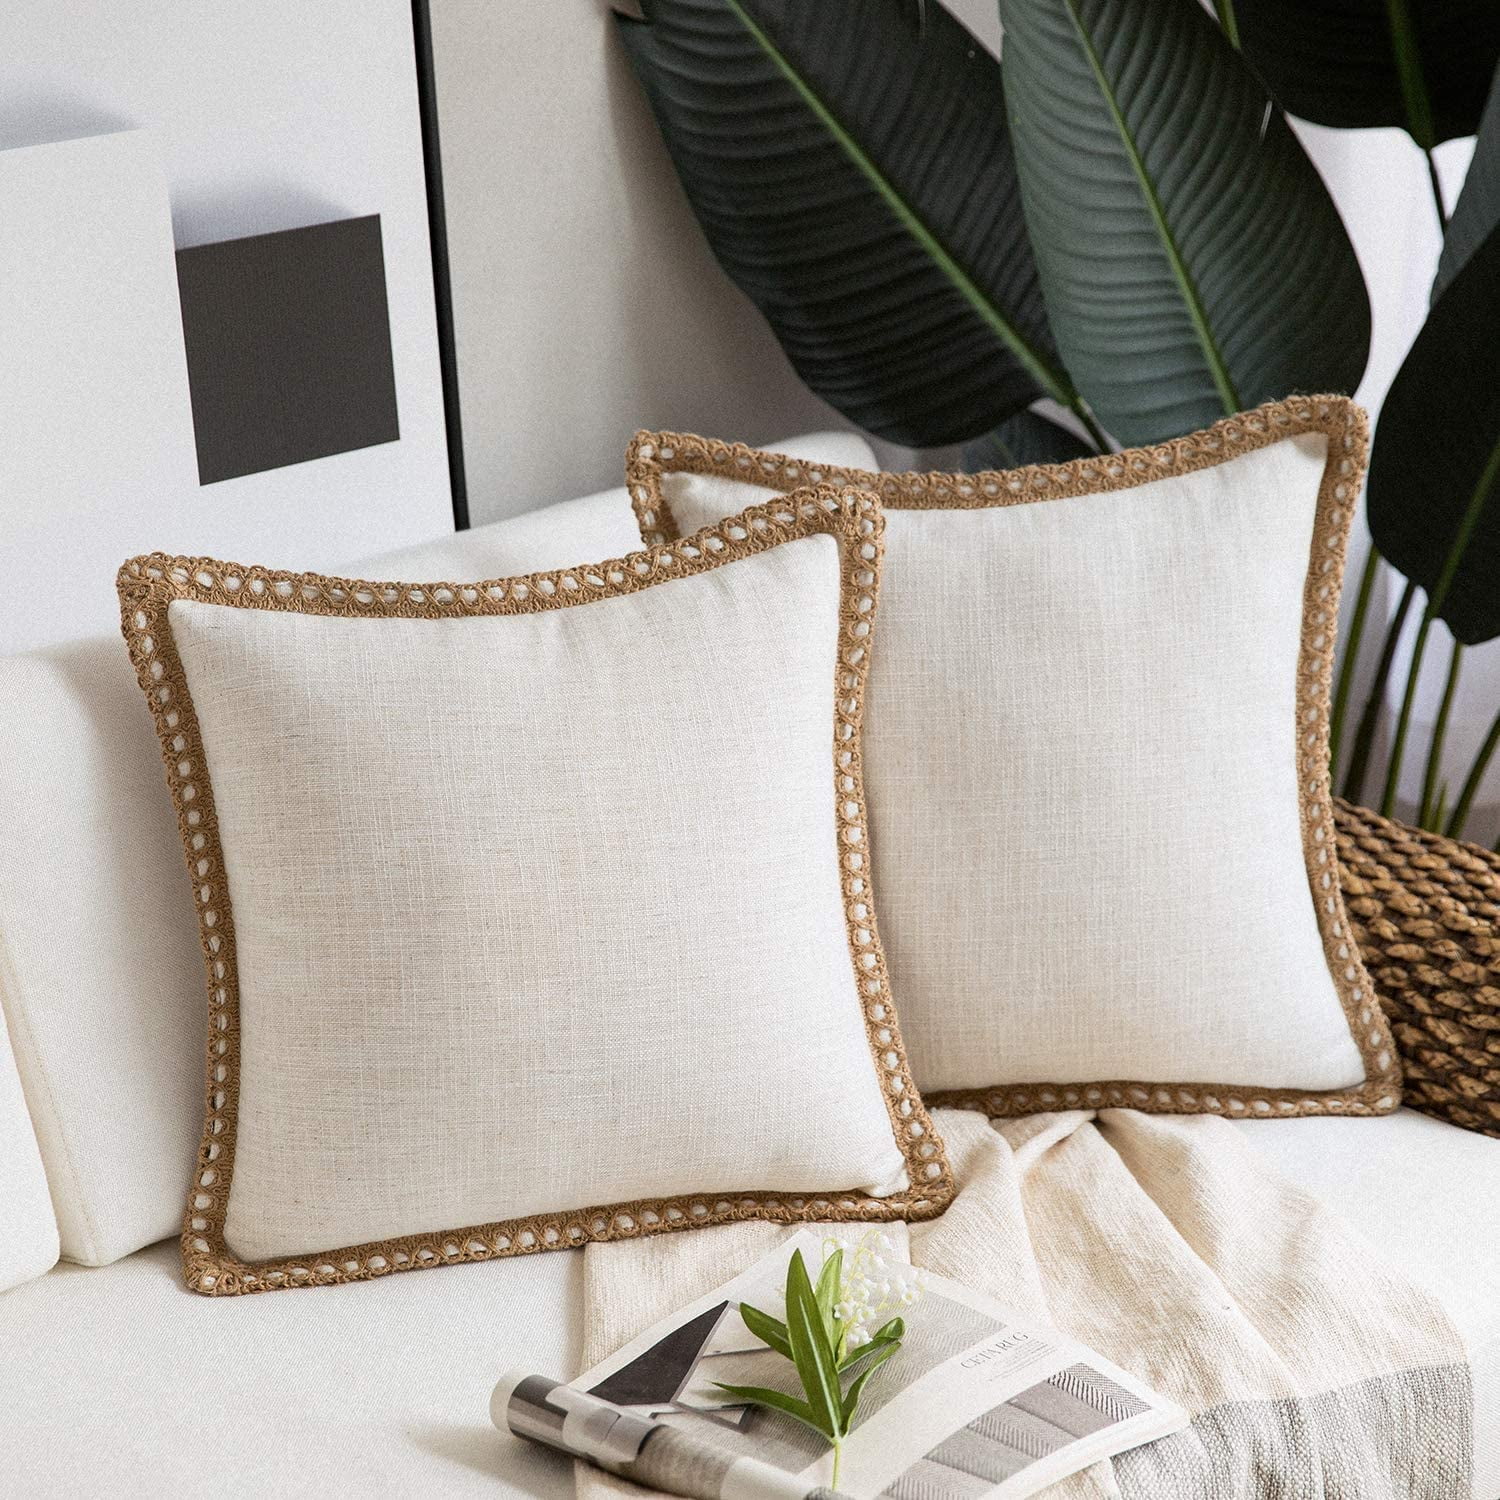 Caflife Throw Pillow Covers 12x20 for Boho Bed Couch, 2 Pack Elegant Home  Decorative Off White with Tassels Linen Burlap Throw Pillows for Farmhouse